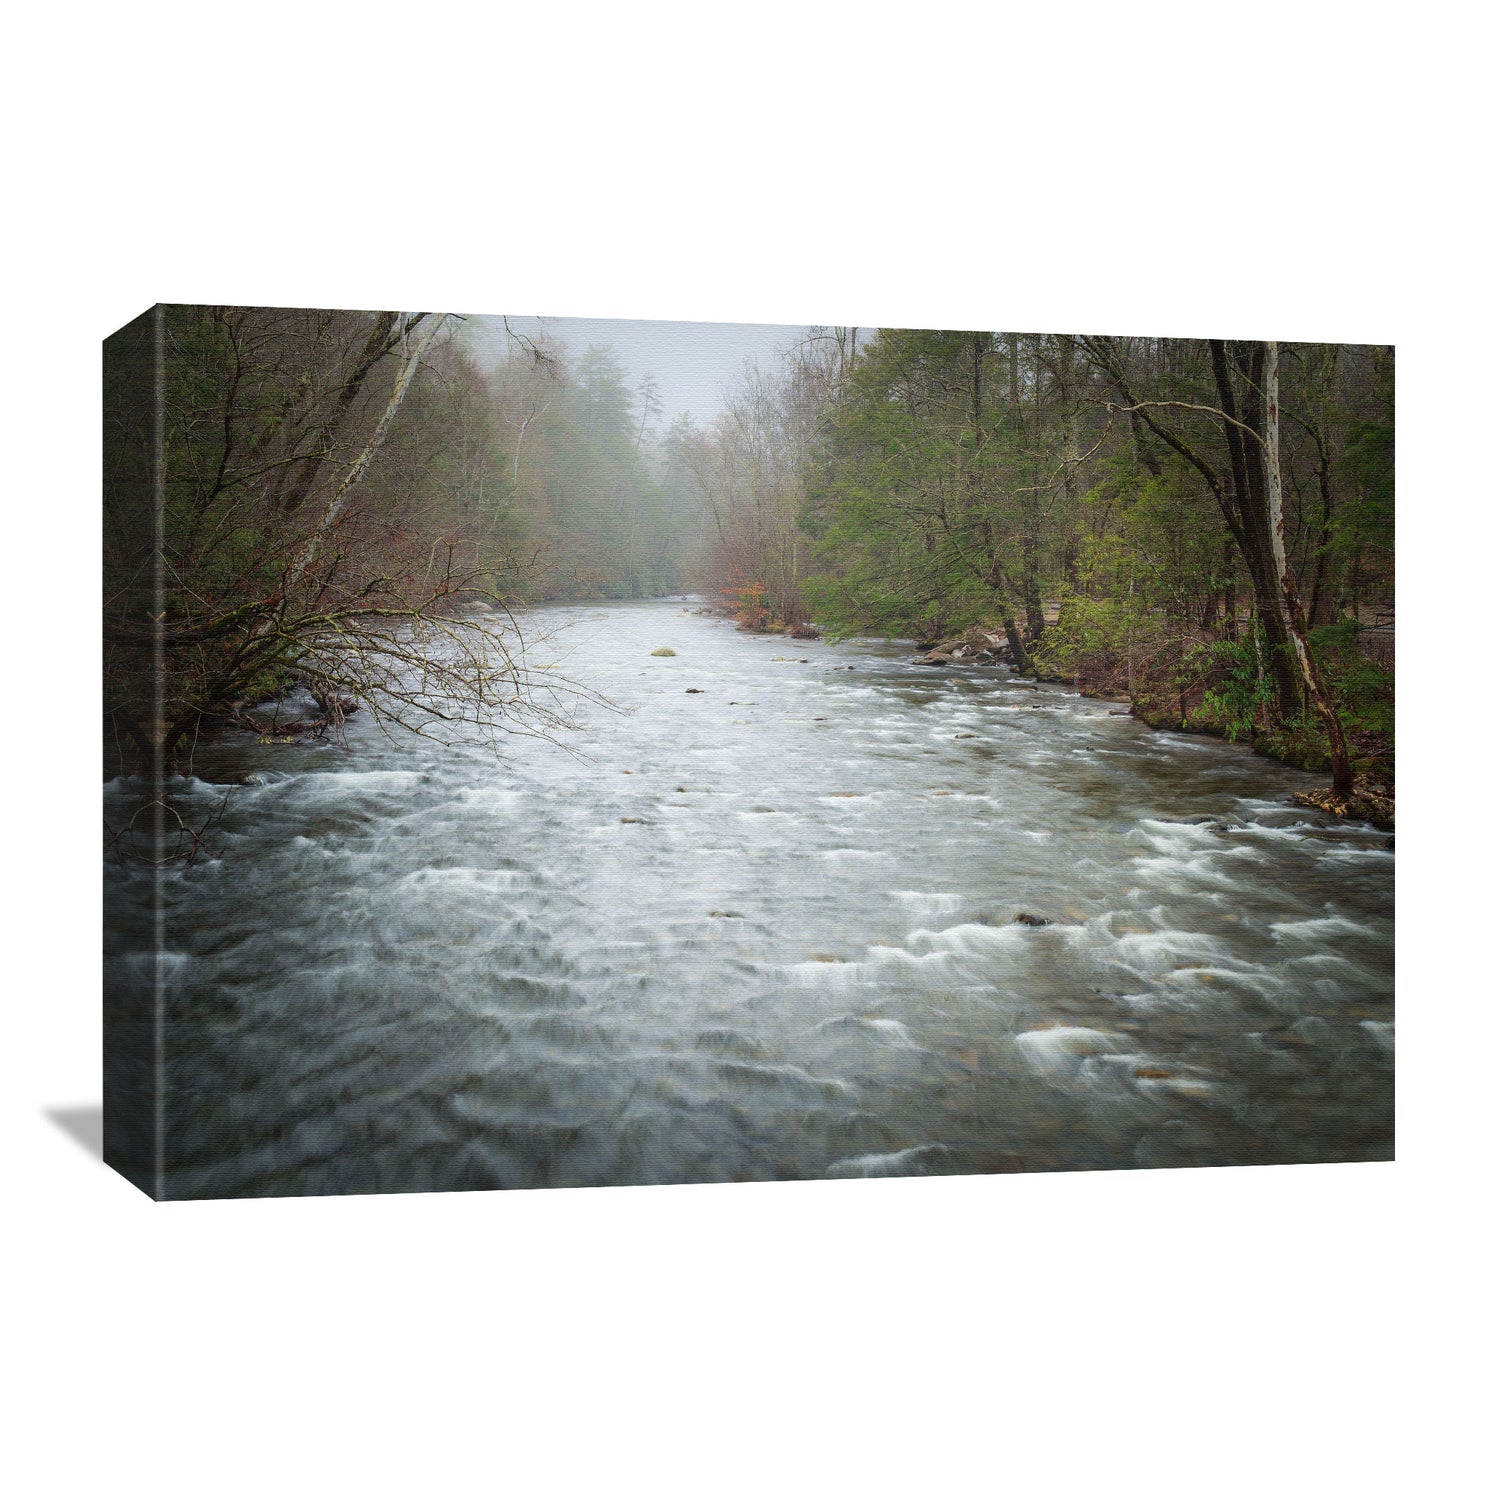 Easy-to-enjoy art that shows the special beauty of the Smoky Mountains and the Little River.